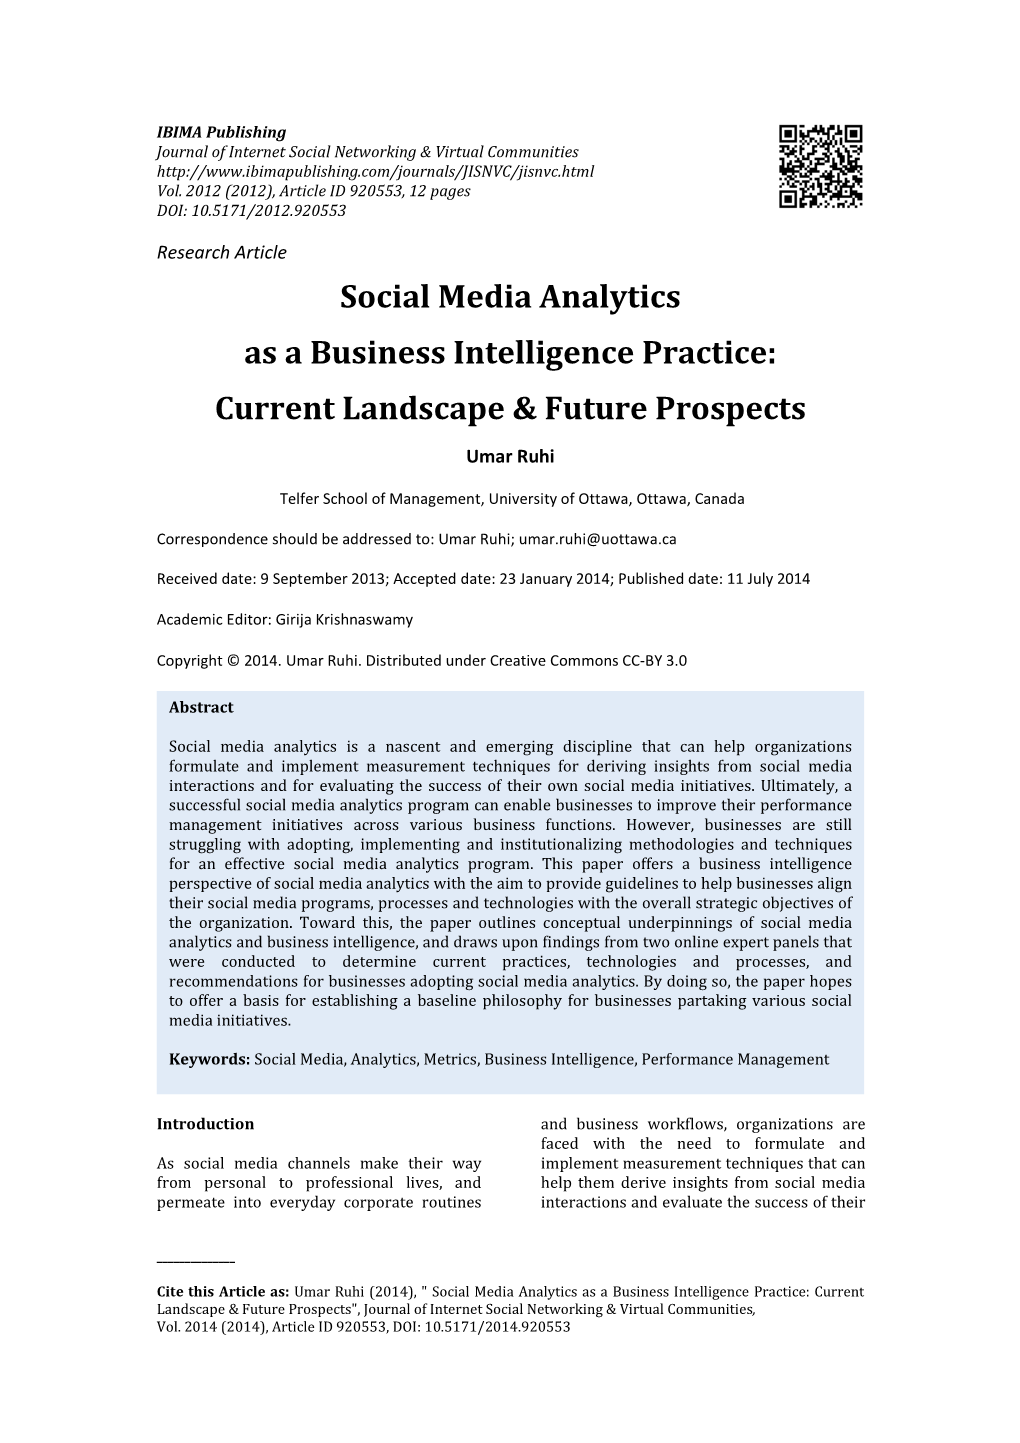 Social Media Analytics As a Business Intelligence Practice: Current Landscape & Future Prospects Umar Ruhi